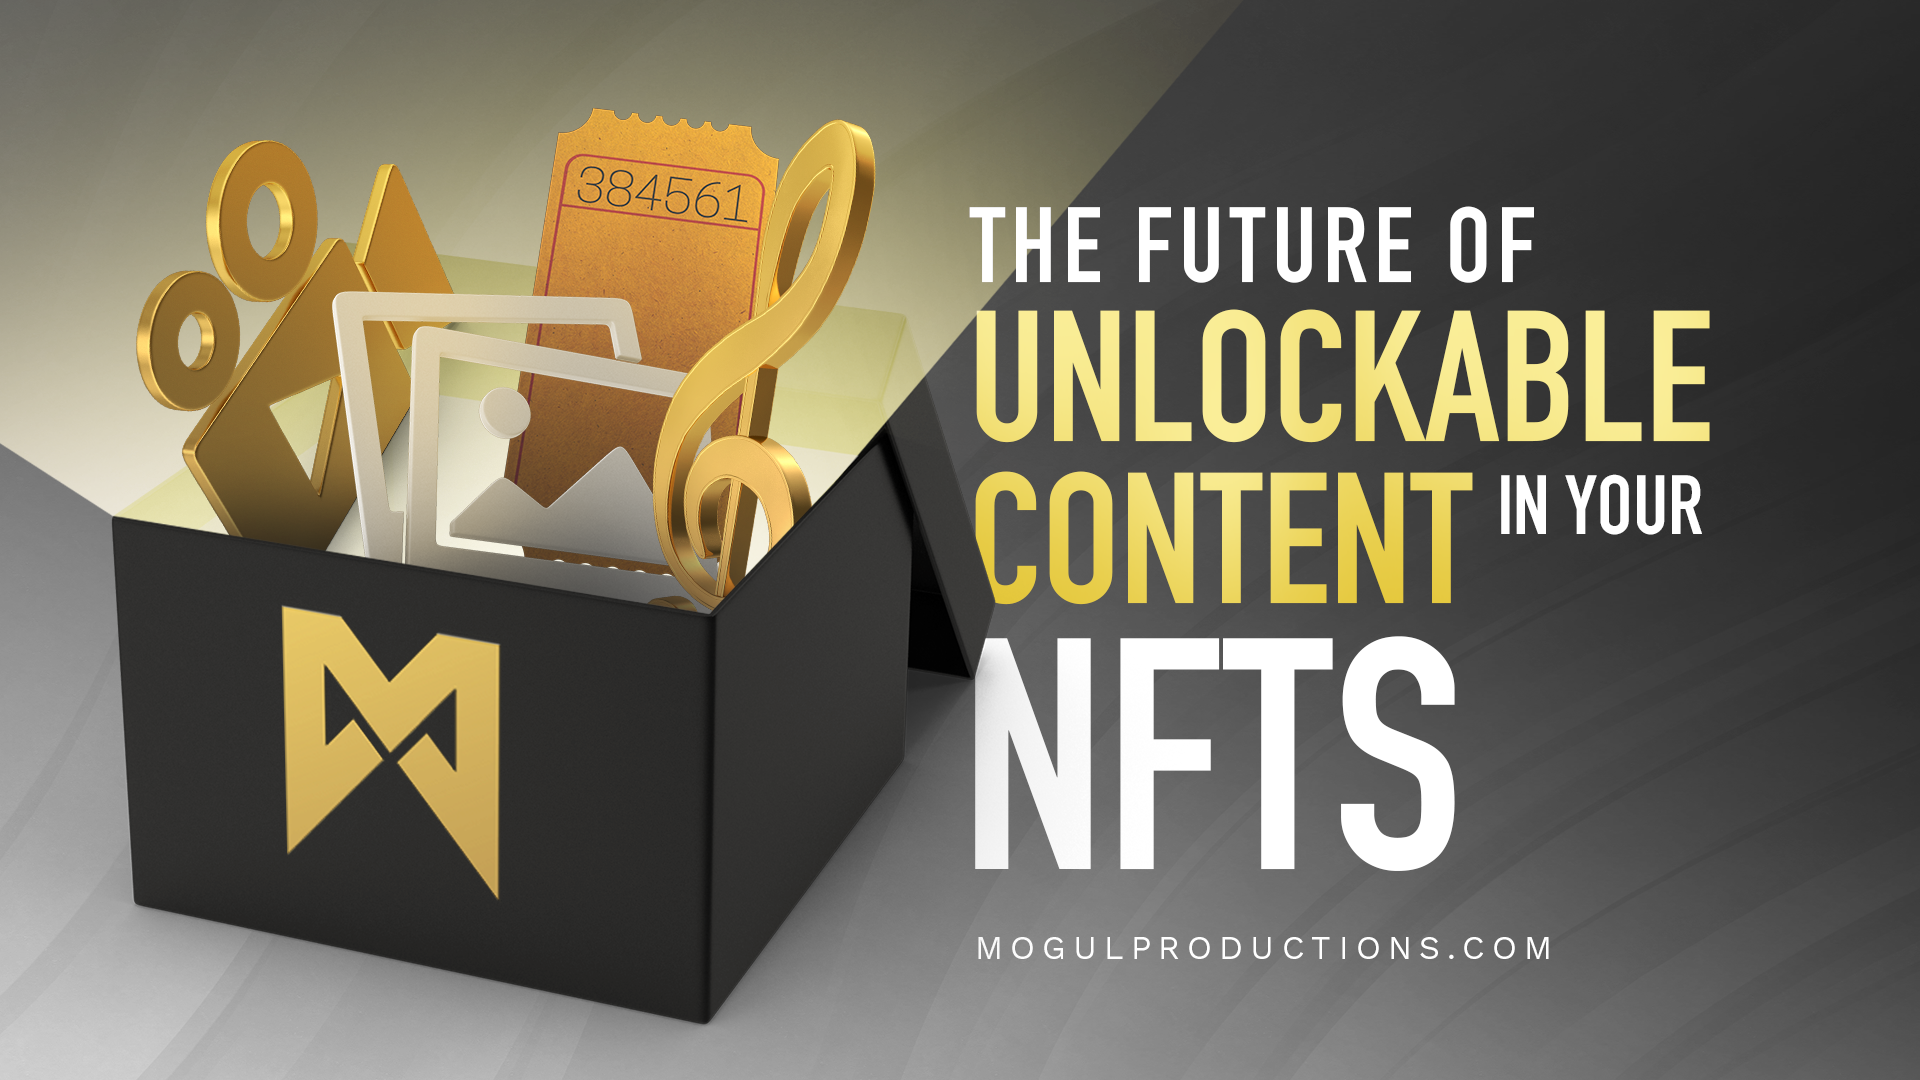 Mogul Productions - The Future of Unlockable Content in Your NFTs